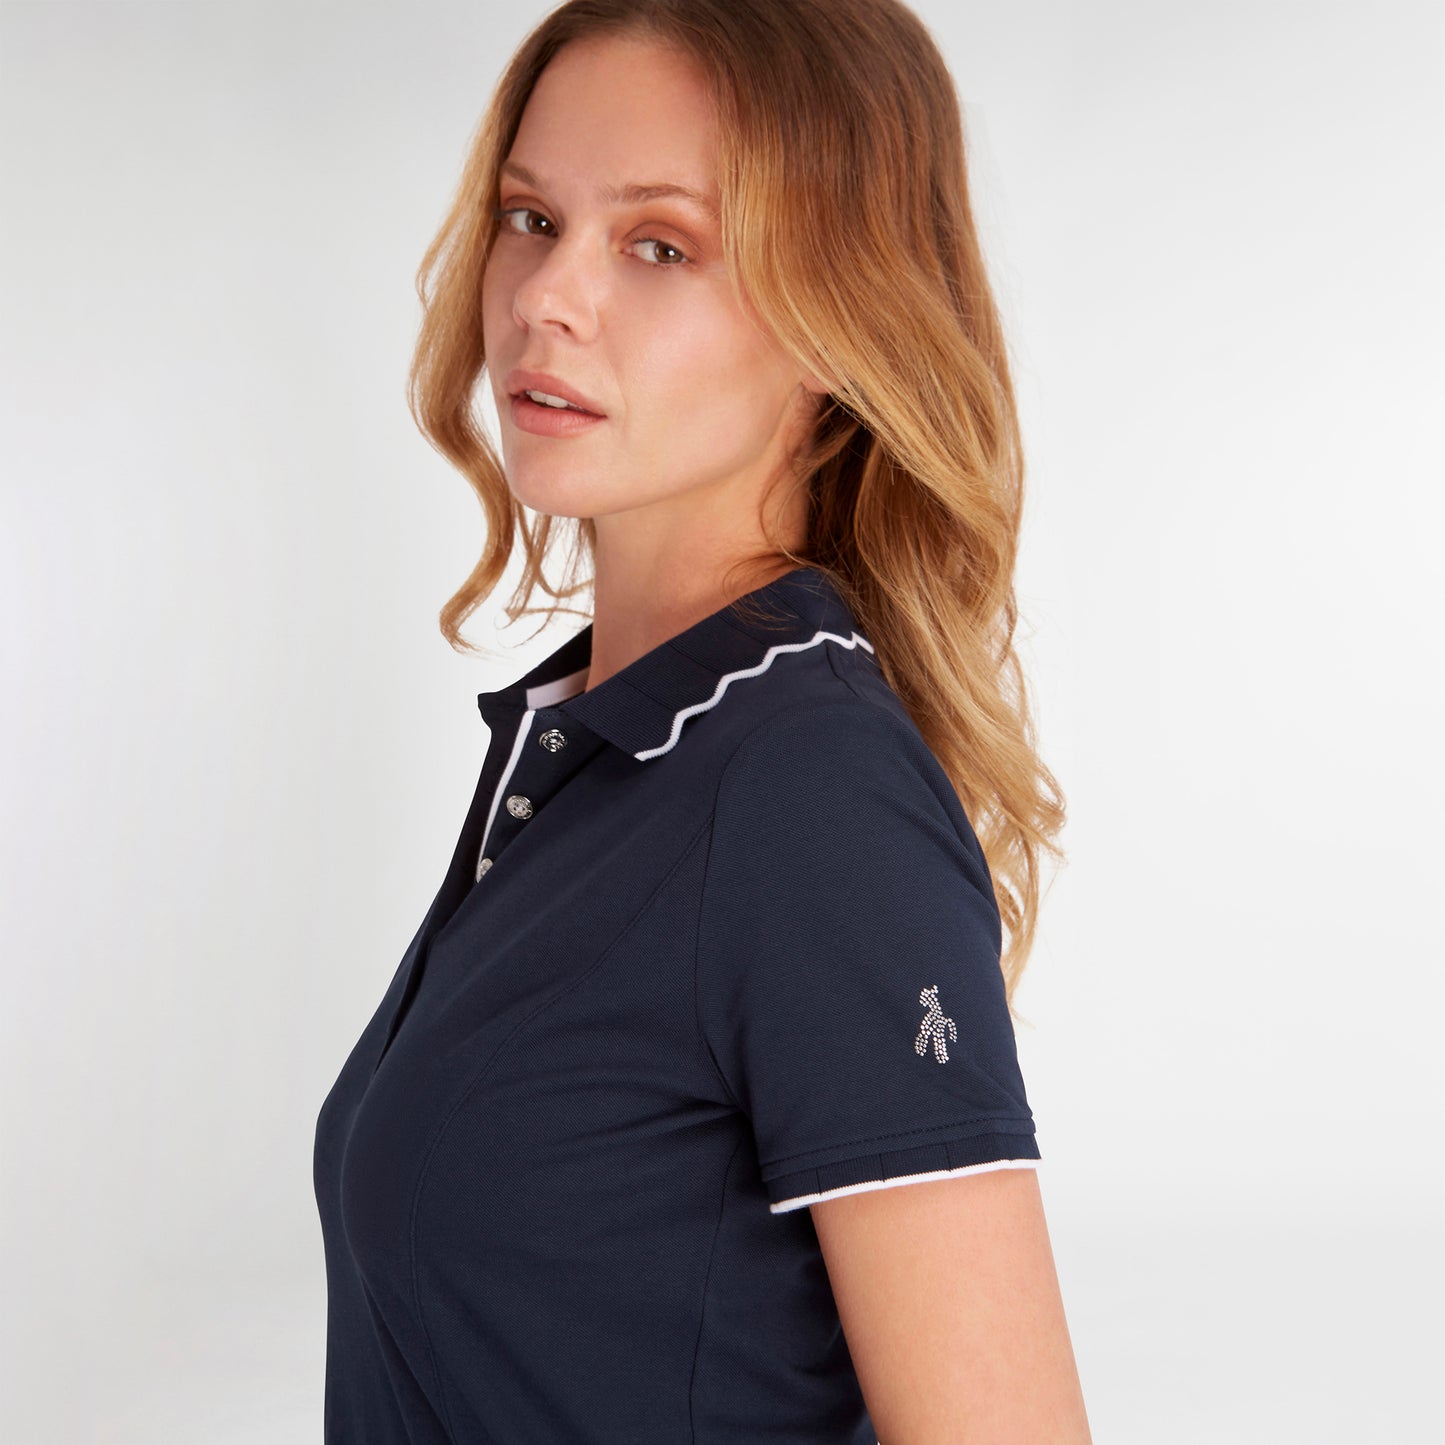 Green Lamb Ladies Short Sleeve Navy Golf Polo with Scalloped Collar